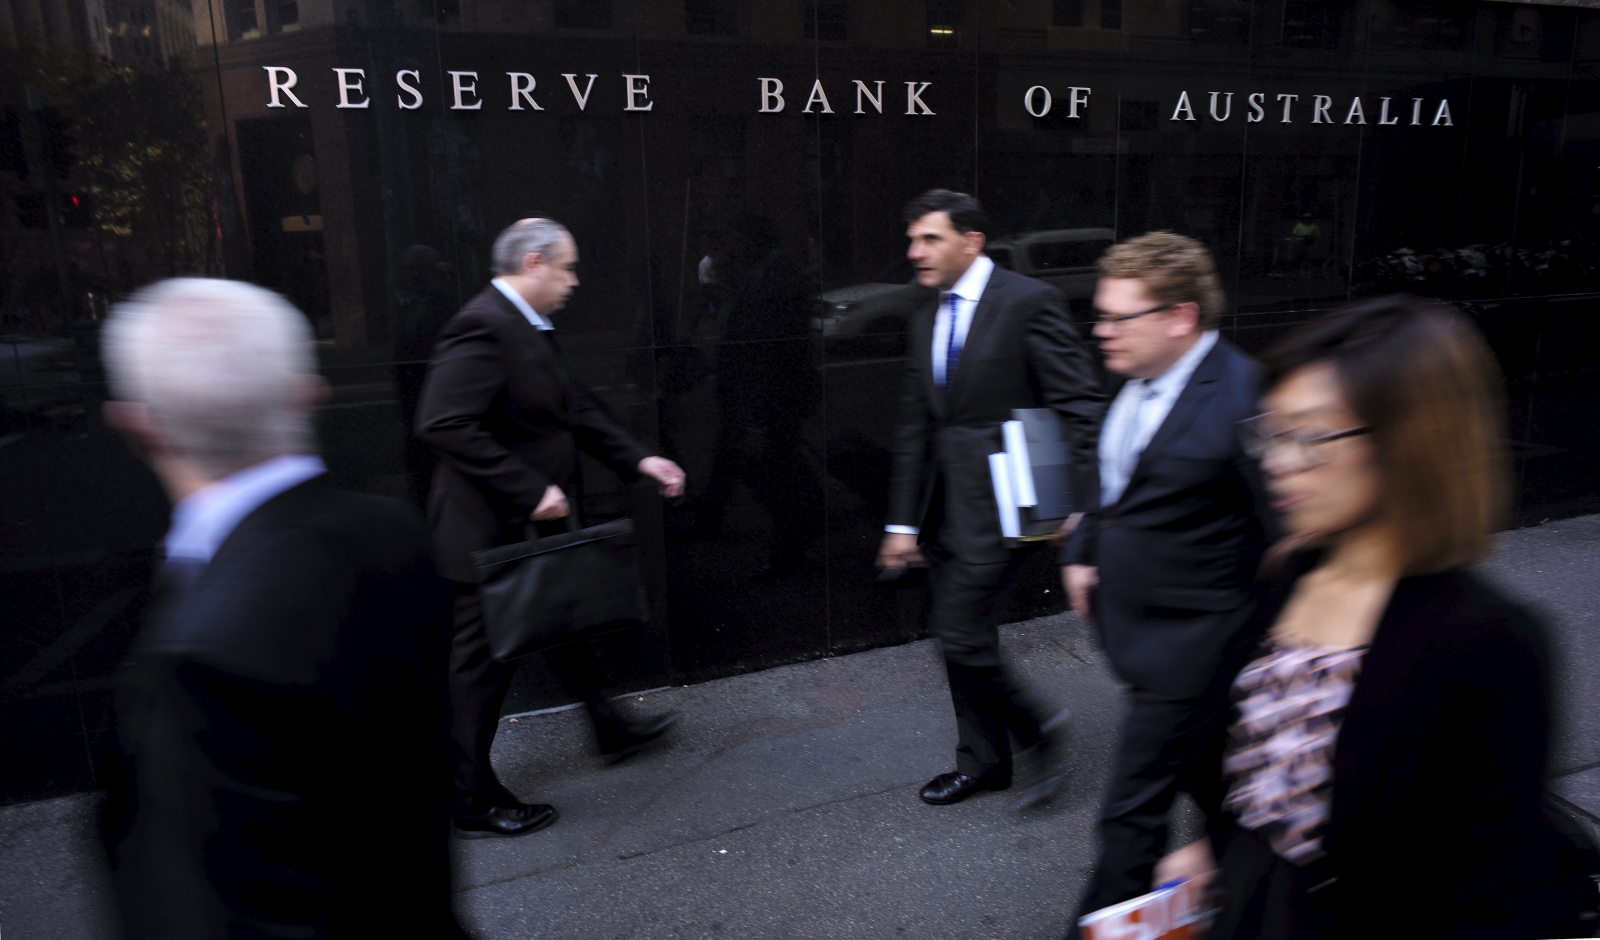 RBA Cash Rate Remains Unchanged At 1.5%